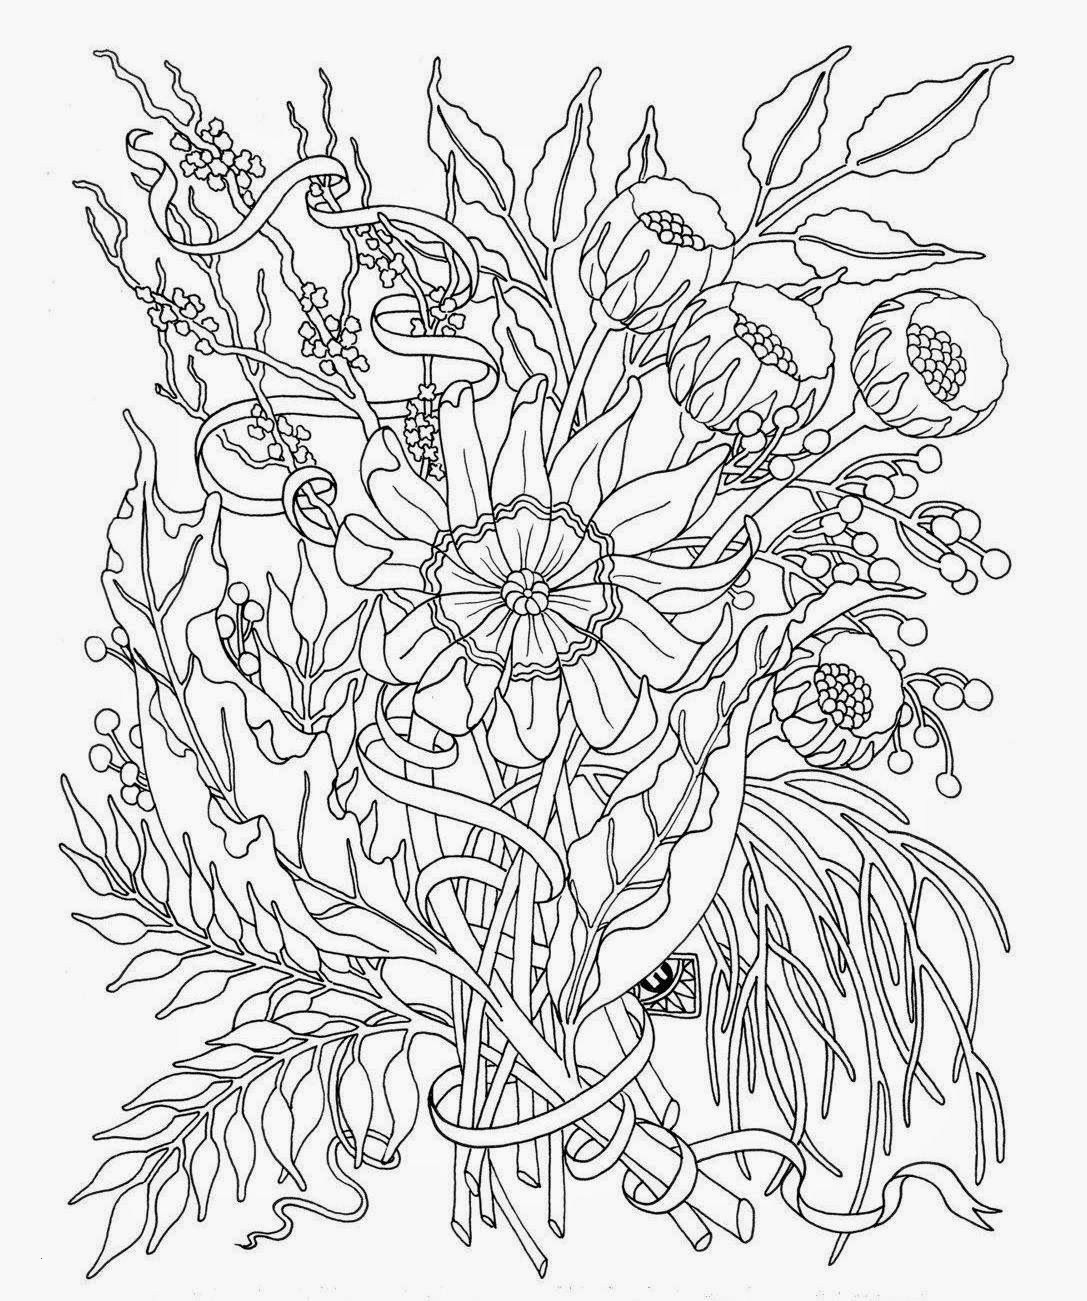 22 Fantastic Vase Of Flowers Art 2024 free download vase of flowers art of 13 new vase of flowers bogekompresorturkiye com throughout coloring pagesflowers luxury cool vases flower vase coloring page pages flowers in a top i 0d